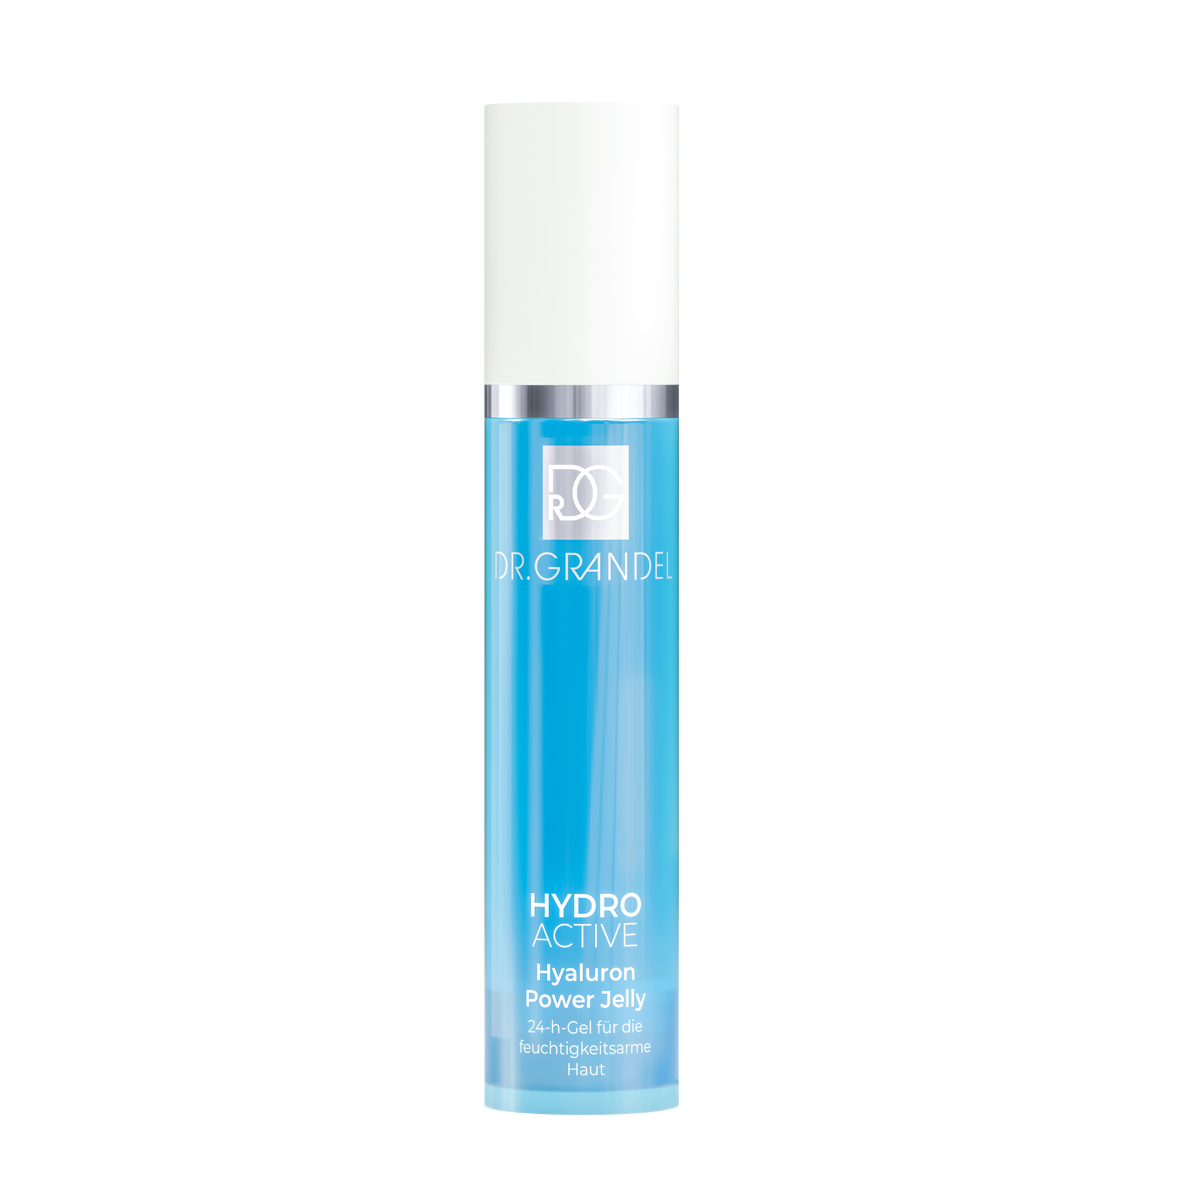 Dr. Grandel Hydro Active Hyaluron Power Jelly 50 ml